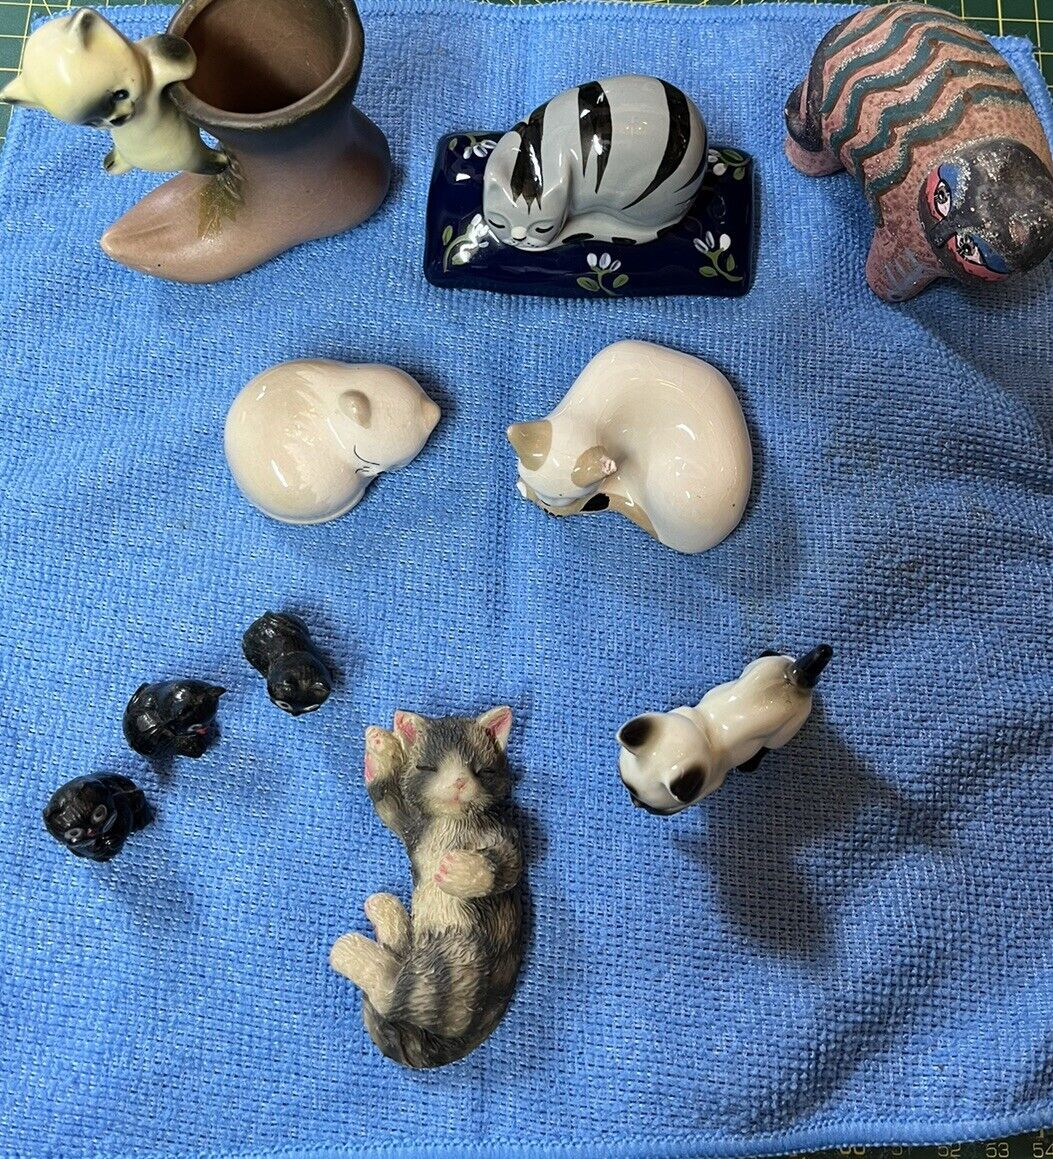 Job Lot Of Cute Cats - 10 In Total. Some Made Of Plastic, Some Ceramic